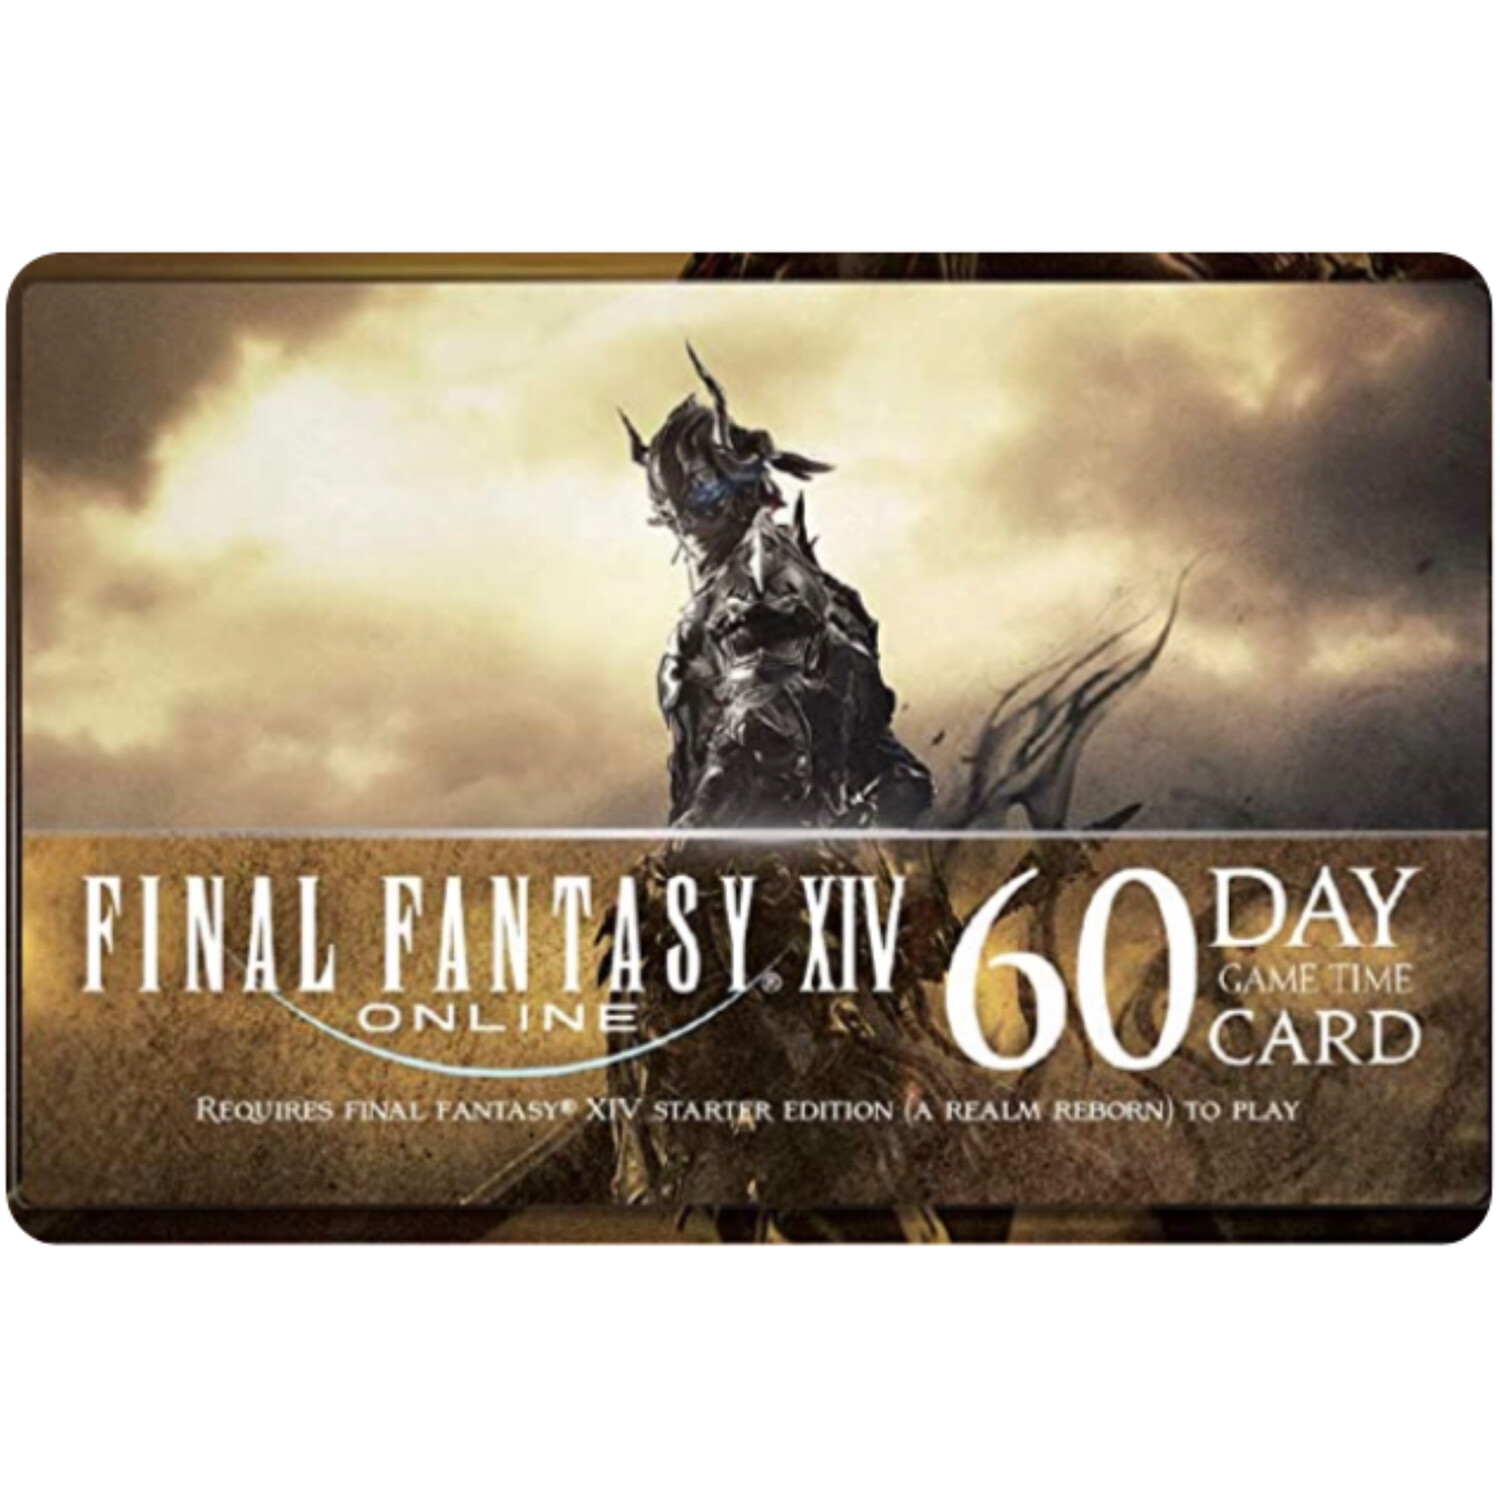 Final Fantasy XIV Online: 60 Day Time Cards US